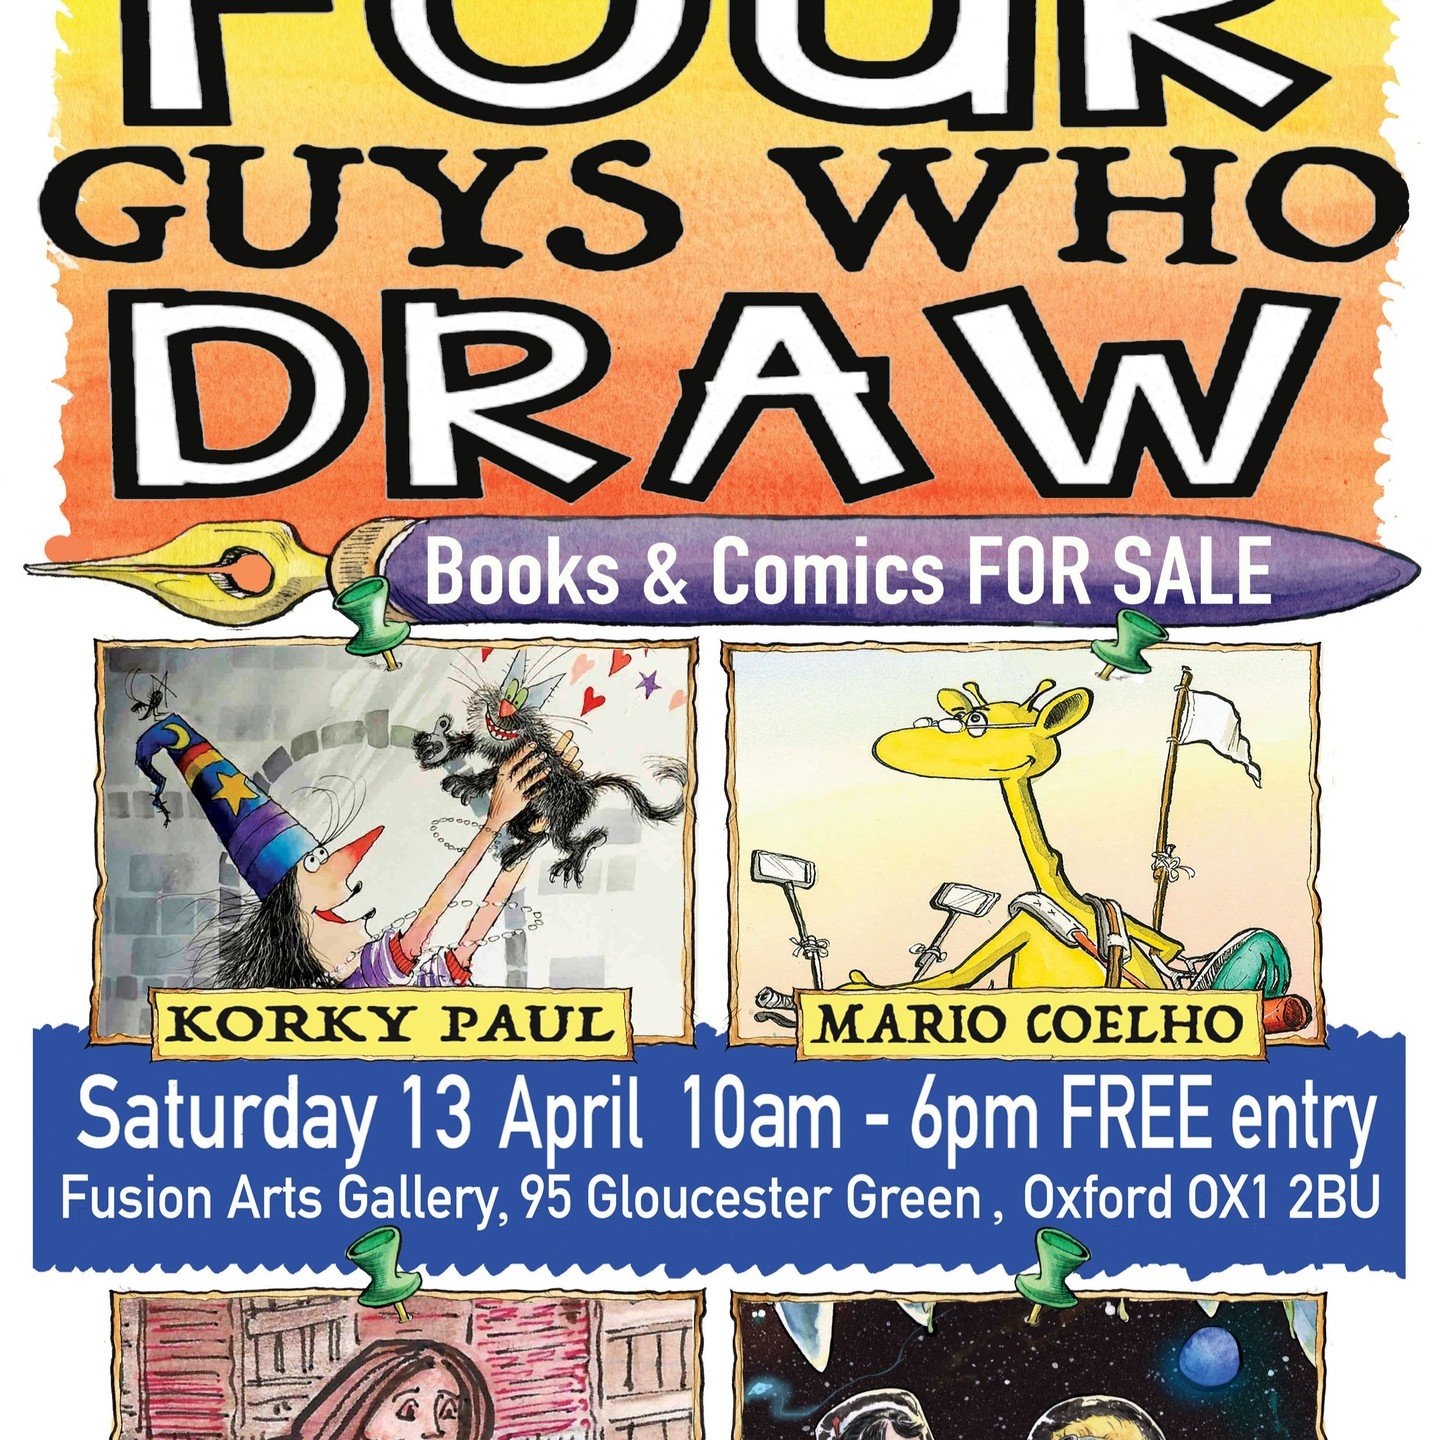 Blithering Broomsticks!
Crackerling Cupcakes?
If in Gloucester Green, Oxford, 
Saturday 13 April, 2024....
Come and meet the the FabFour,
A gang of skabengas quick on the draw!